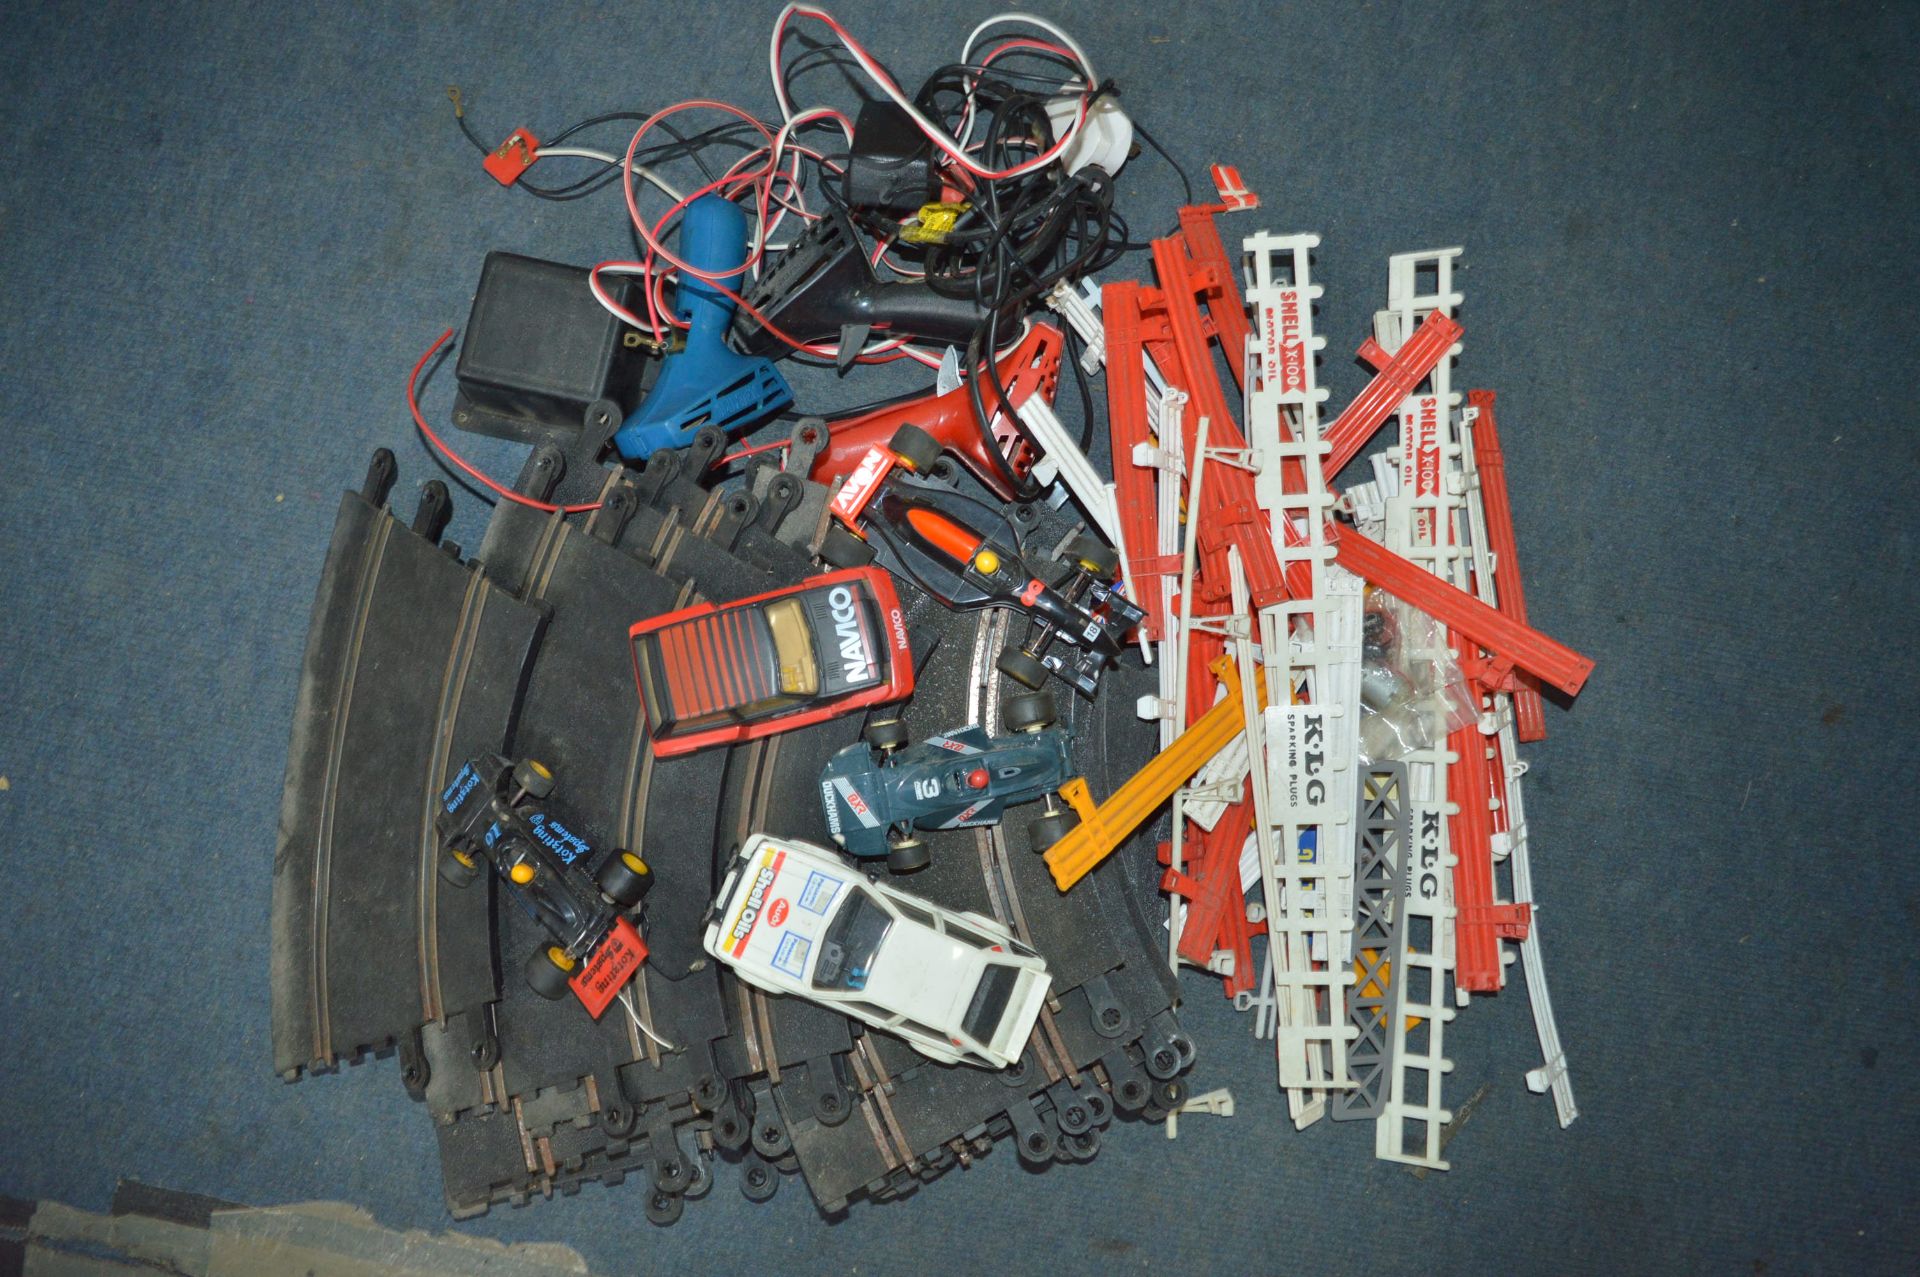 Scalextric Track, Cars and Accessories